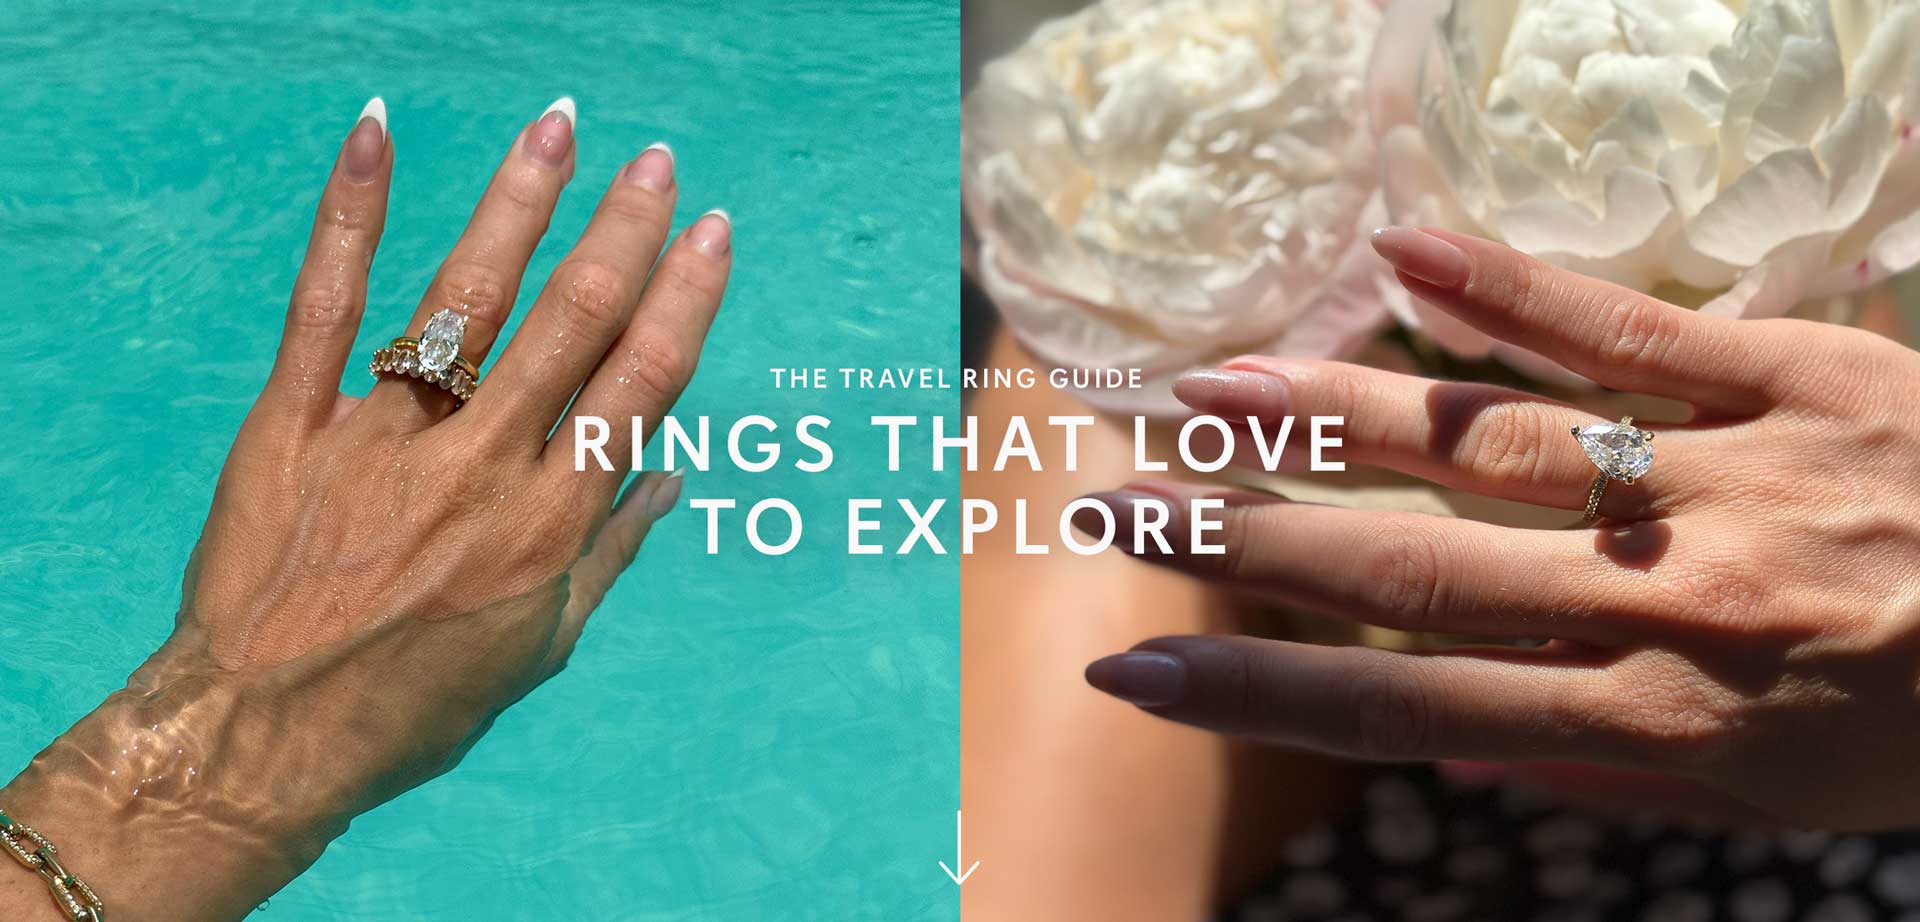 Engagement ring for vacations for $20 and not having to worry about it